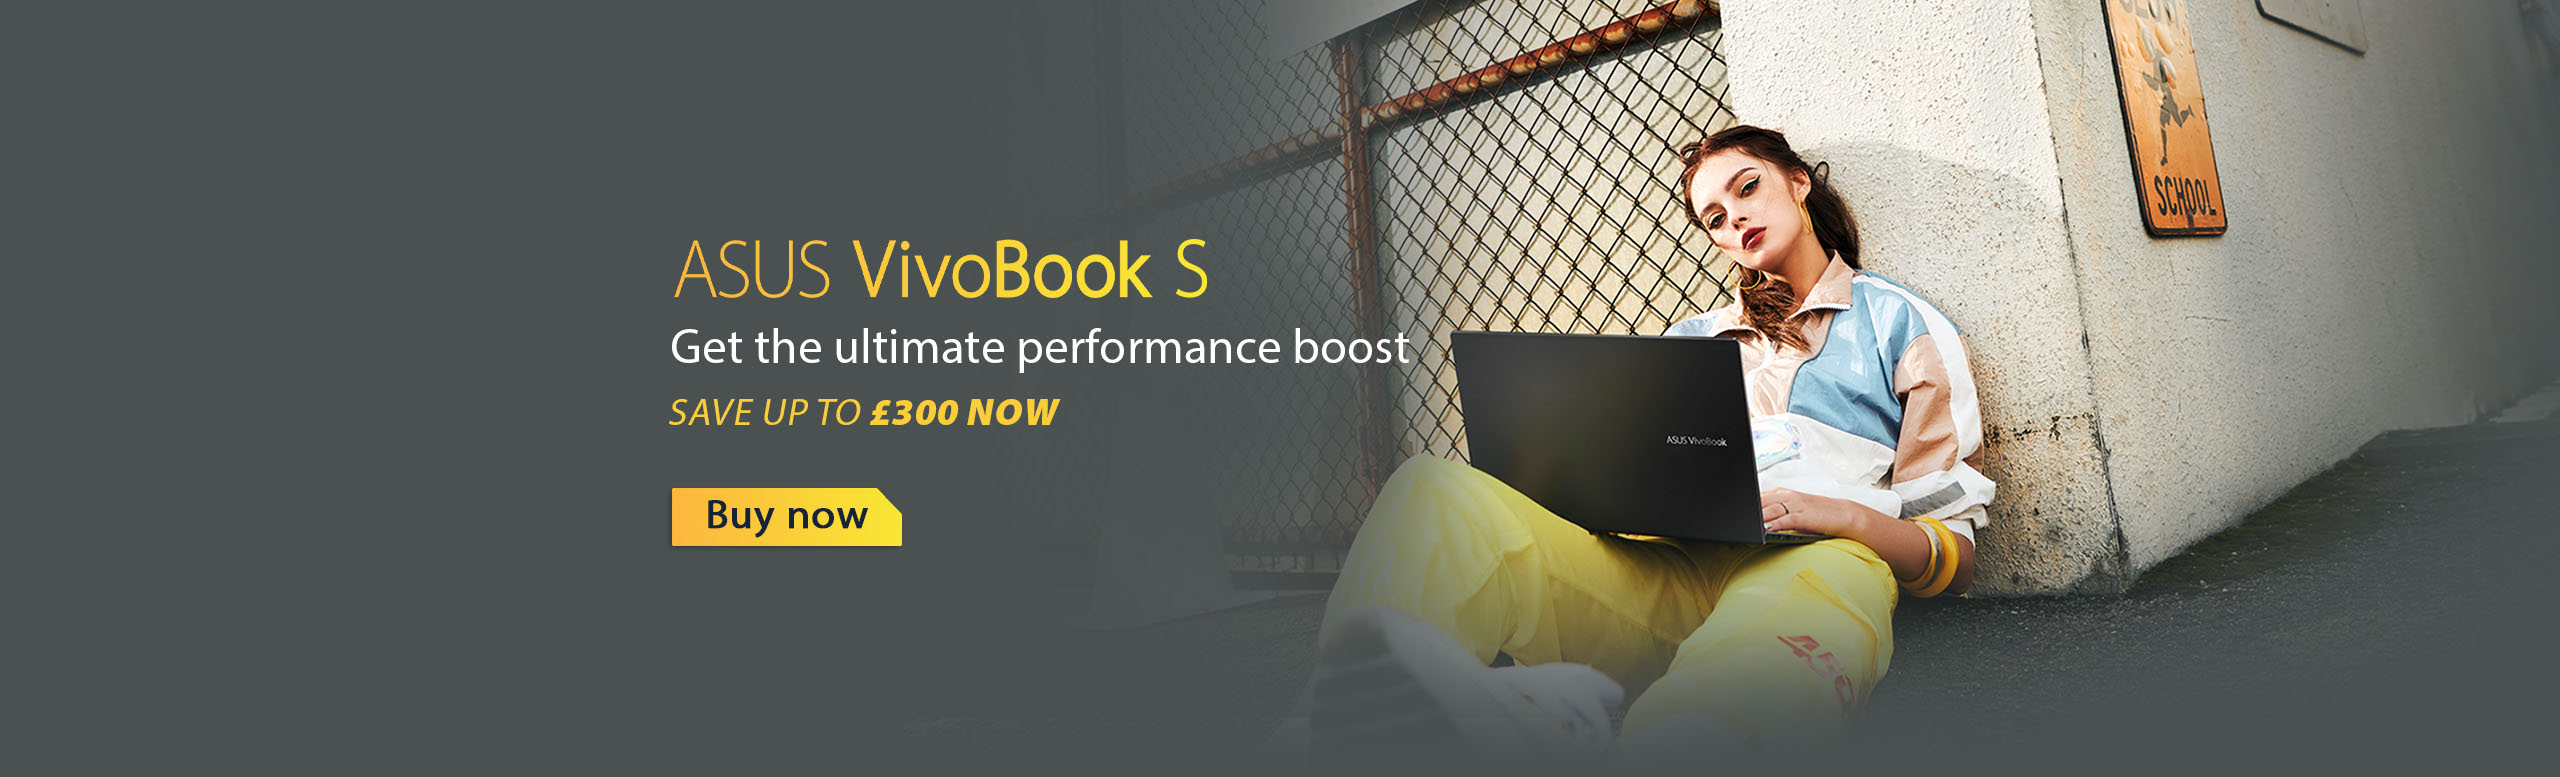 Save up to £300 on the Vivobook S